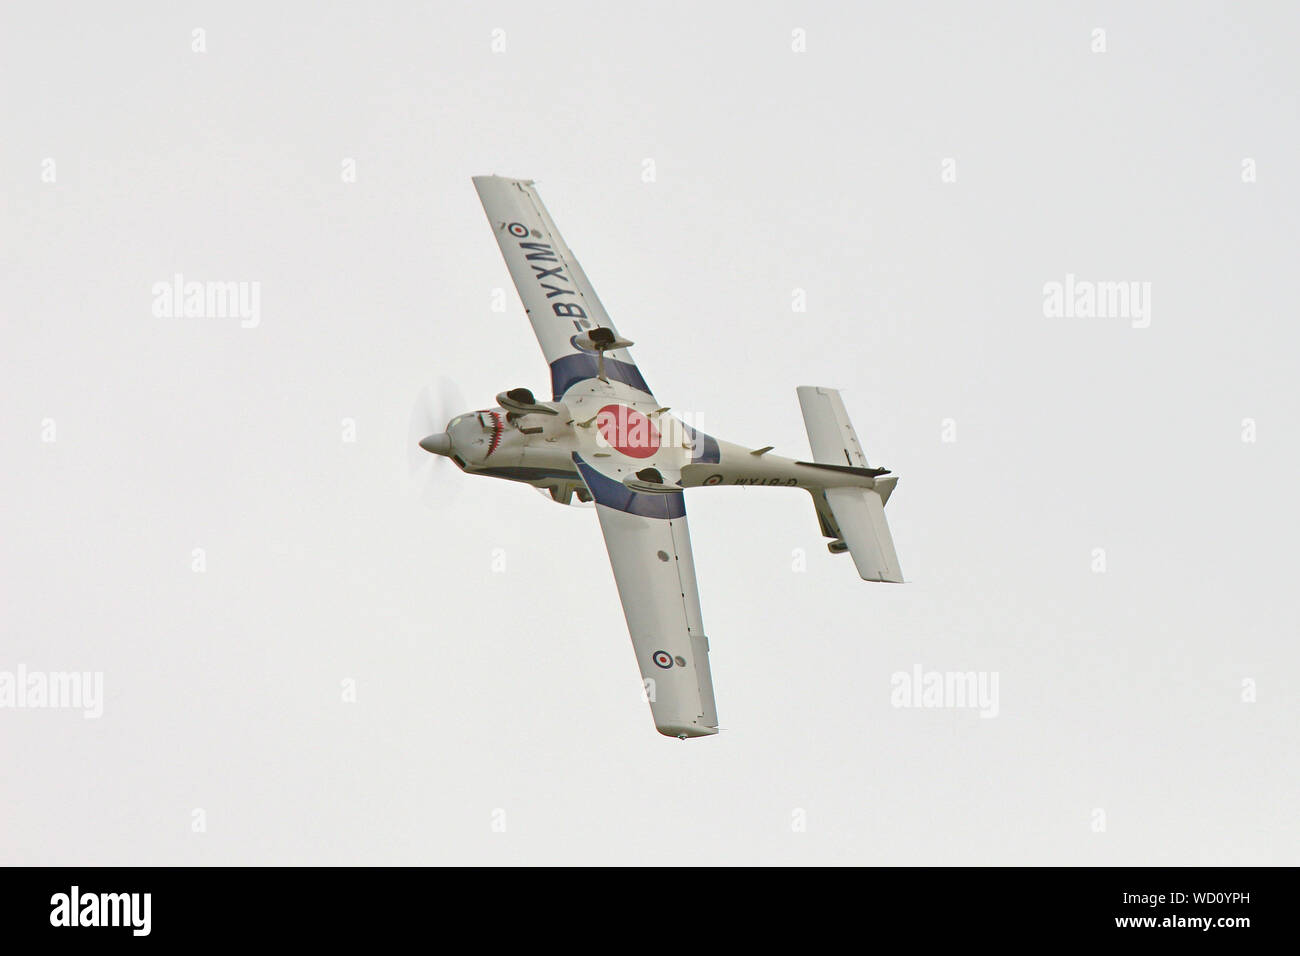 An R.A.F. Tutor (Grob 115E) rolls over onto its back as part of its display at Eastbourne's International Airshow, August 2019. Stock Photo